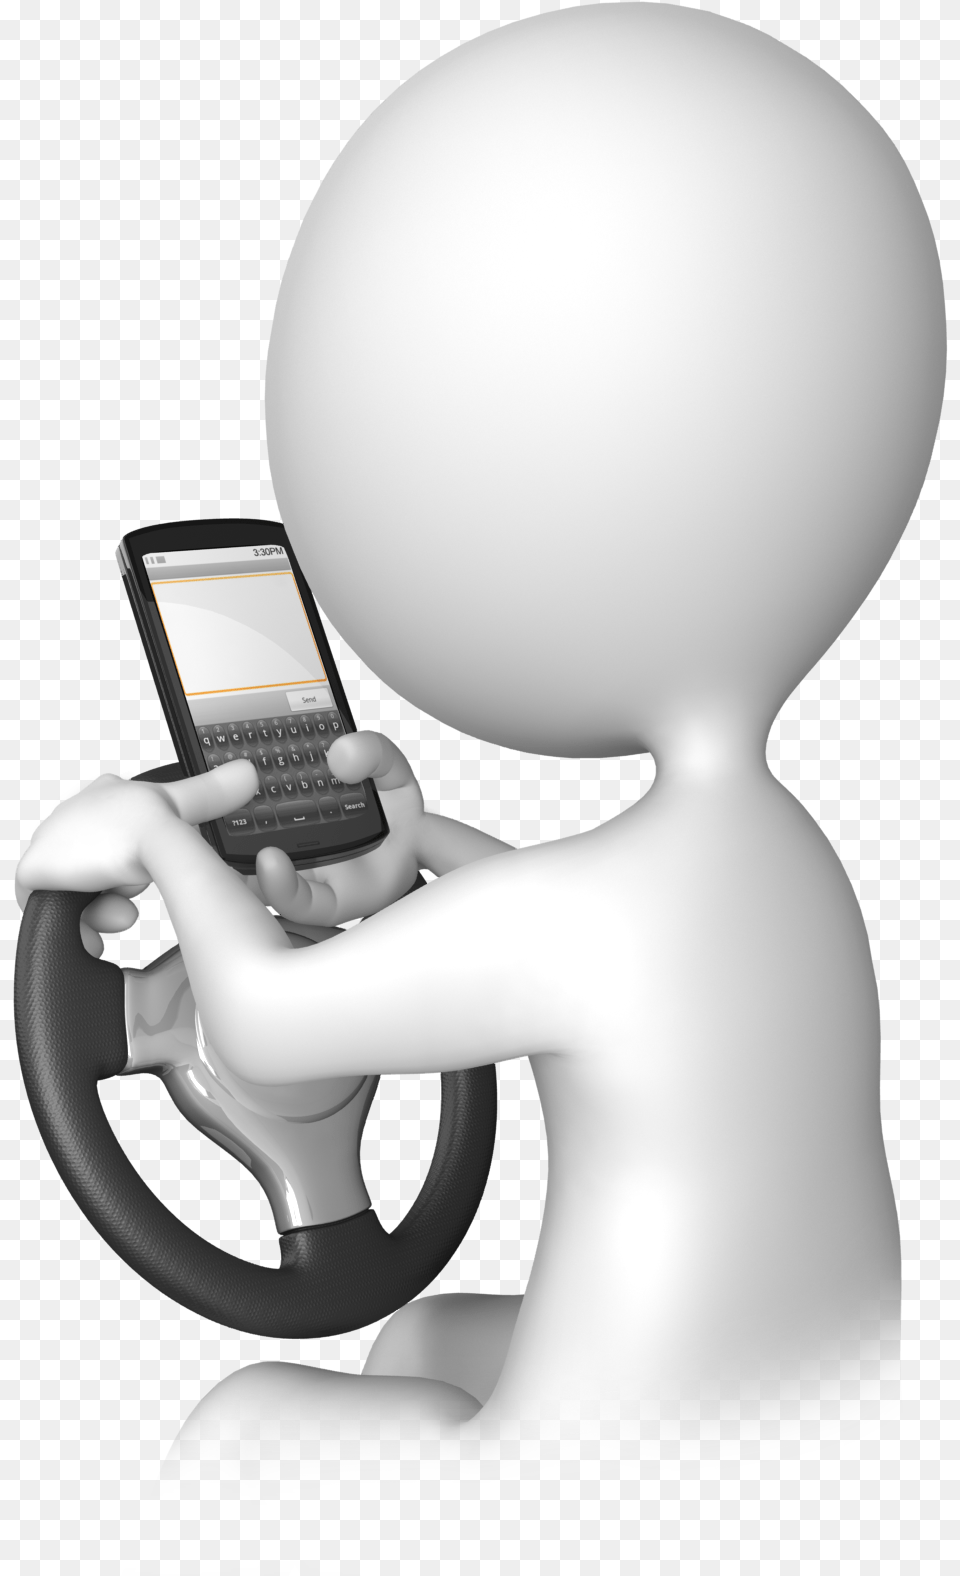 3d Human 3d Icons Little People Stick Figures White No Text While Driving Transparent, Electronics, Mobile Phone, Phone, Texting Free Png Download